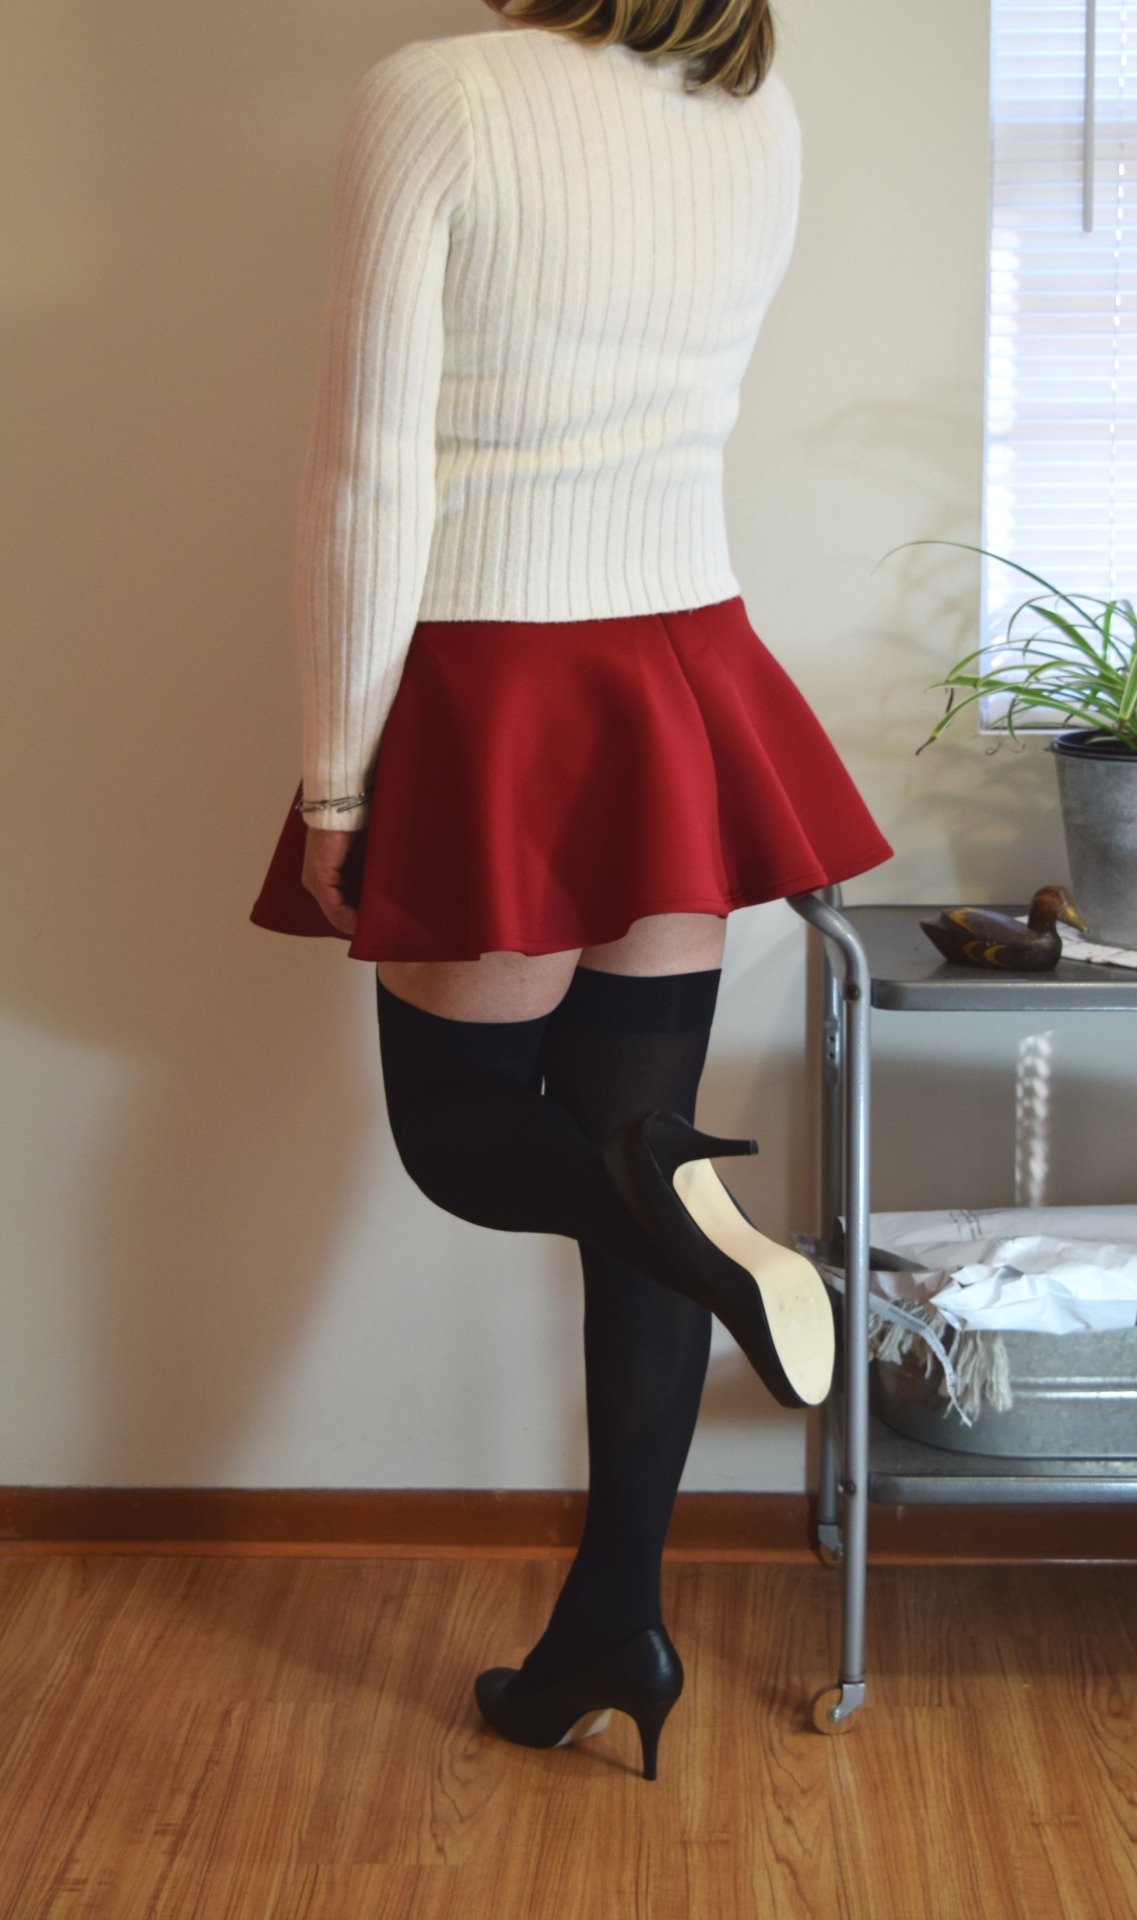 prettylillycd: Skater Skirt and Stockings I saw a similar outfit recently that I